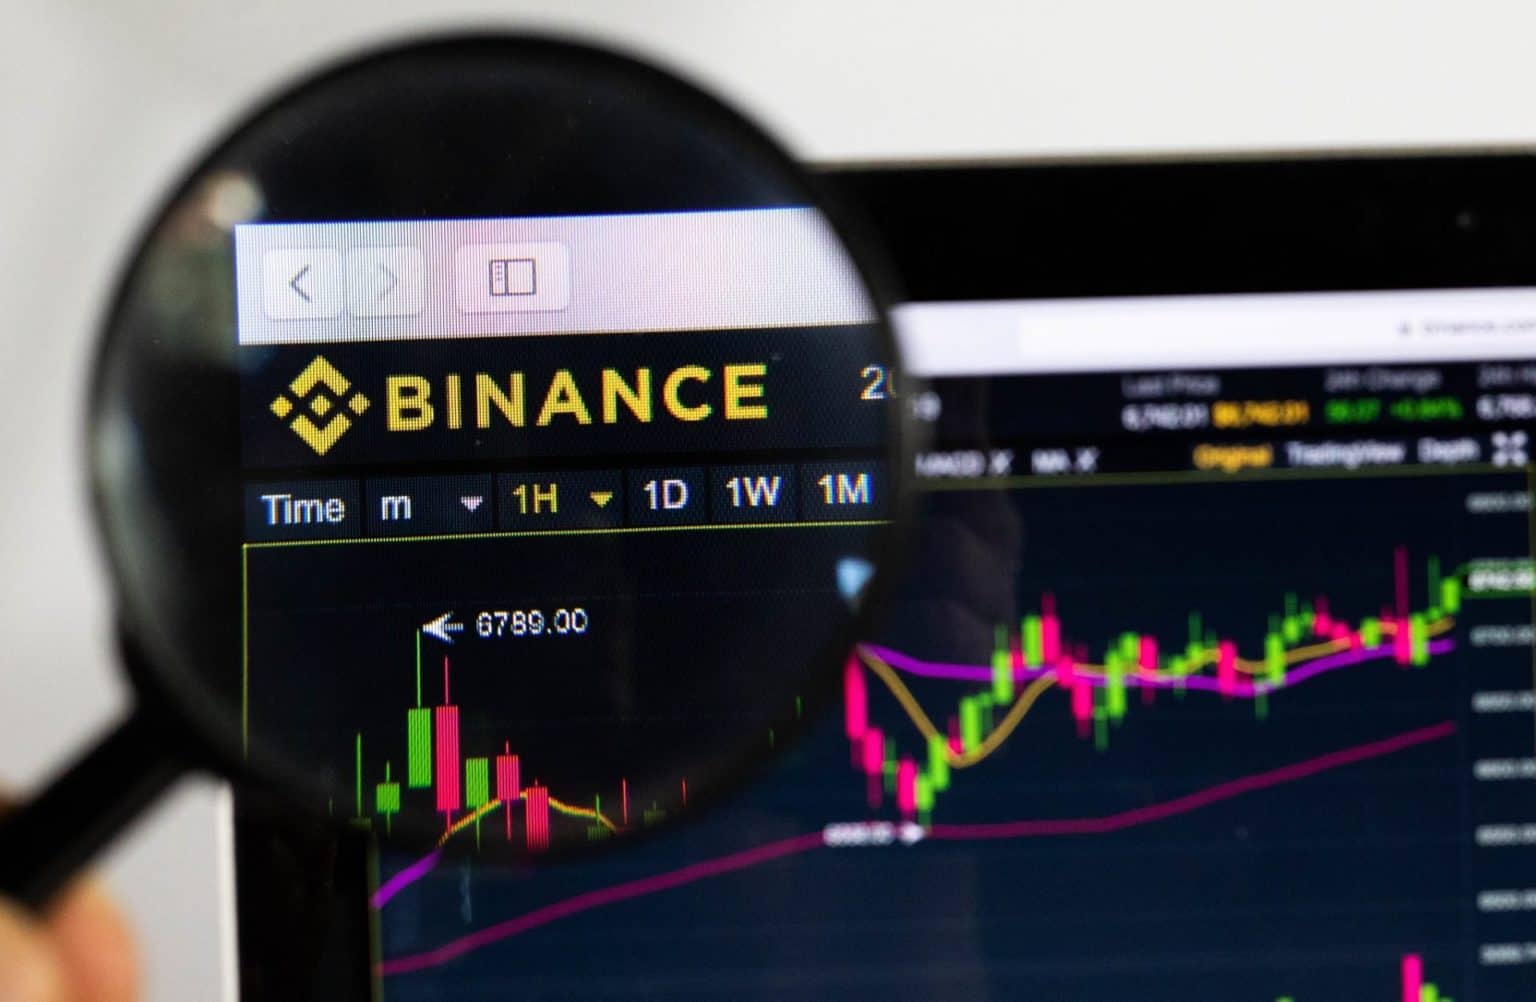 Binance Concludes 2nd Week Of $16M SXP Token Airdrop